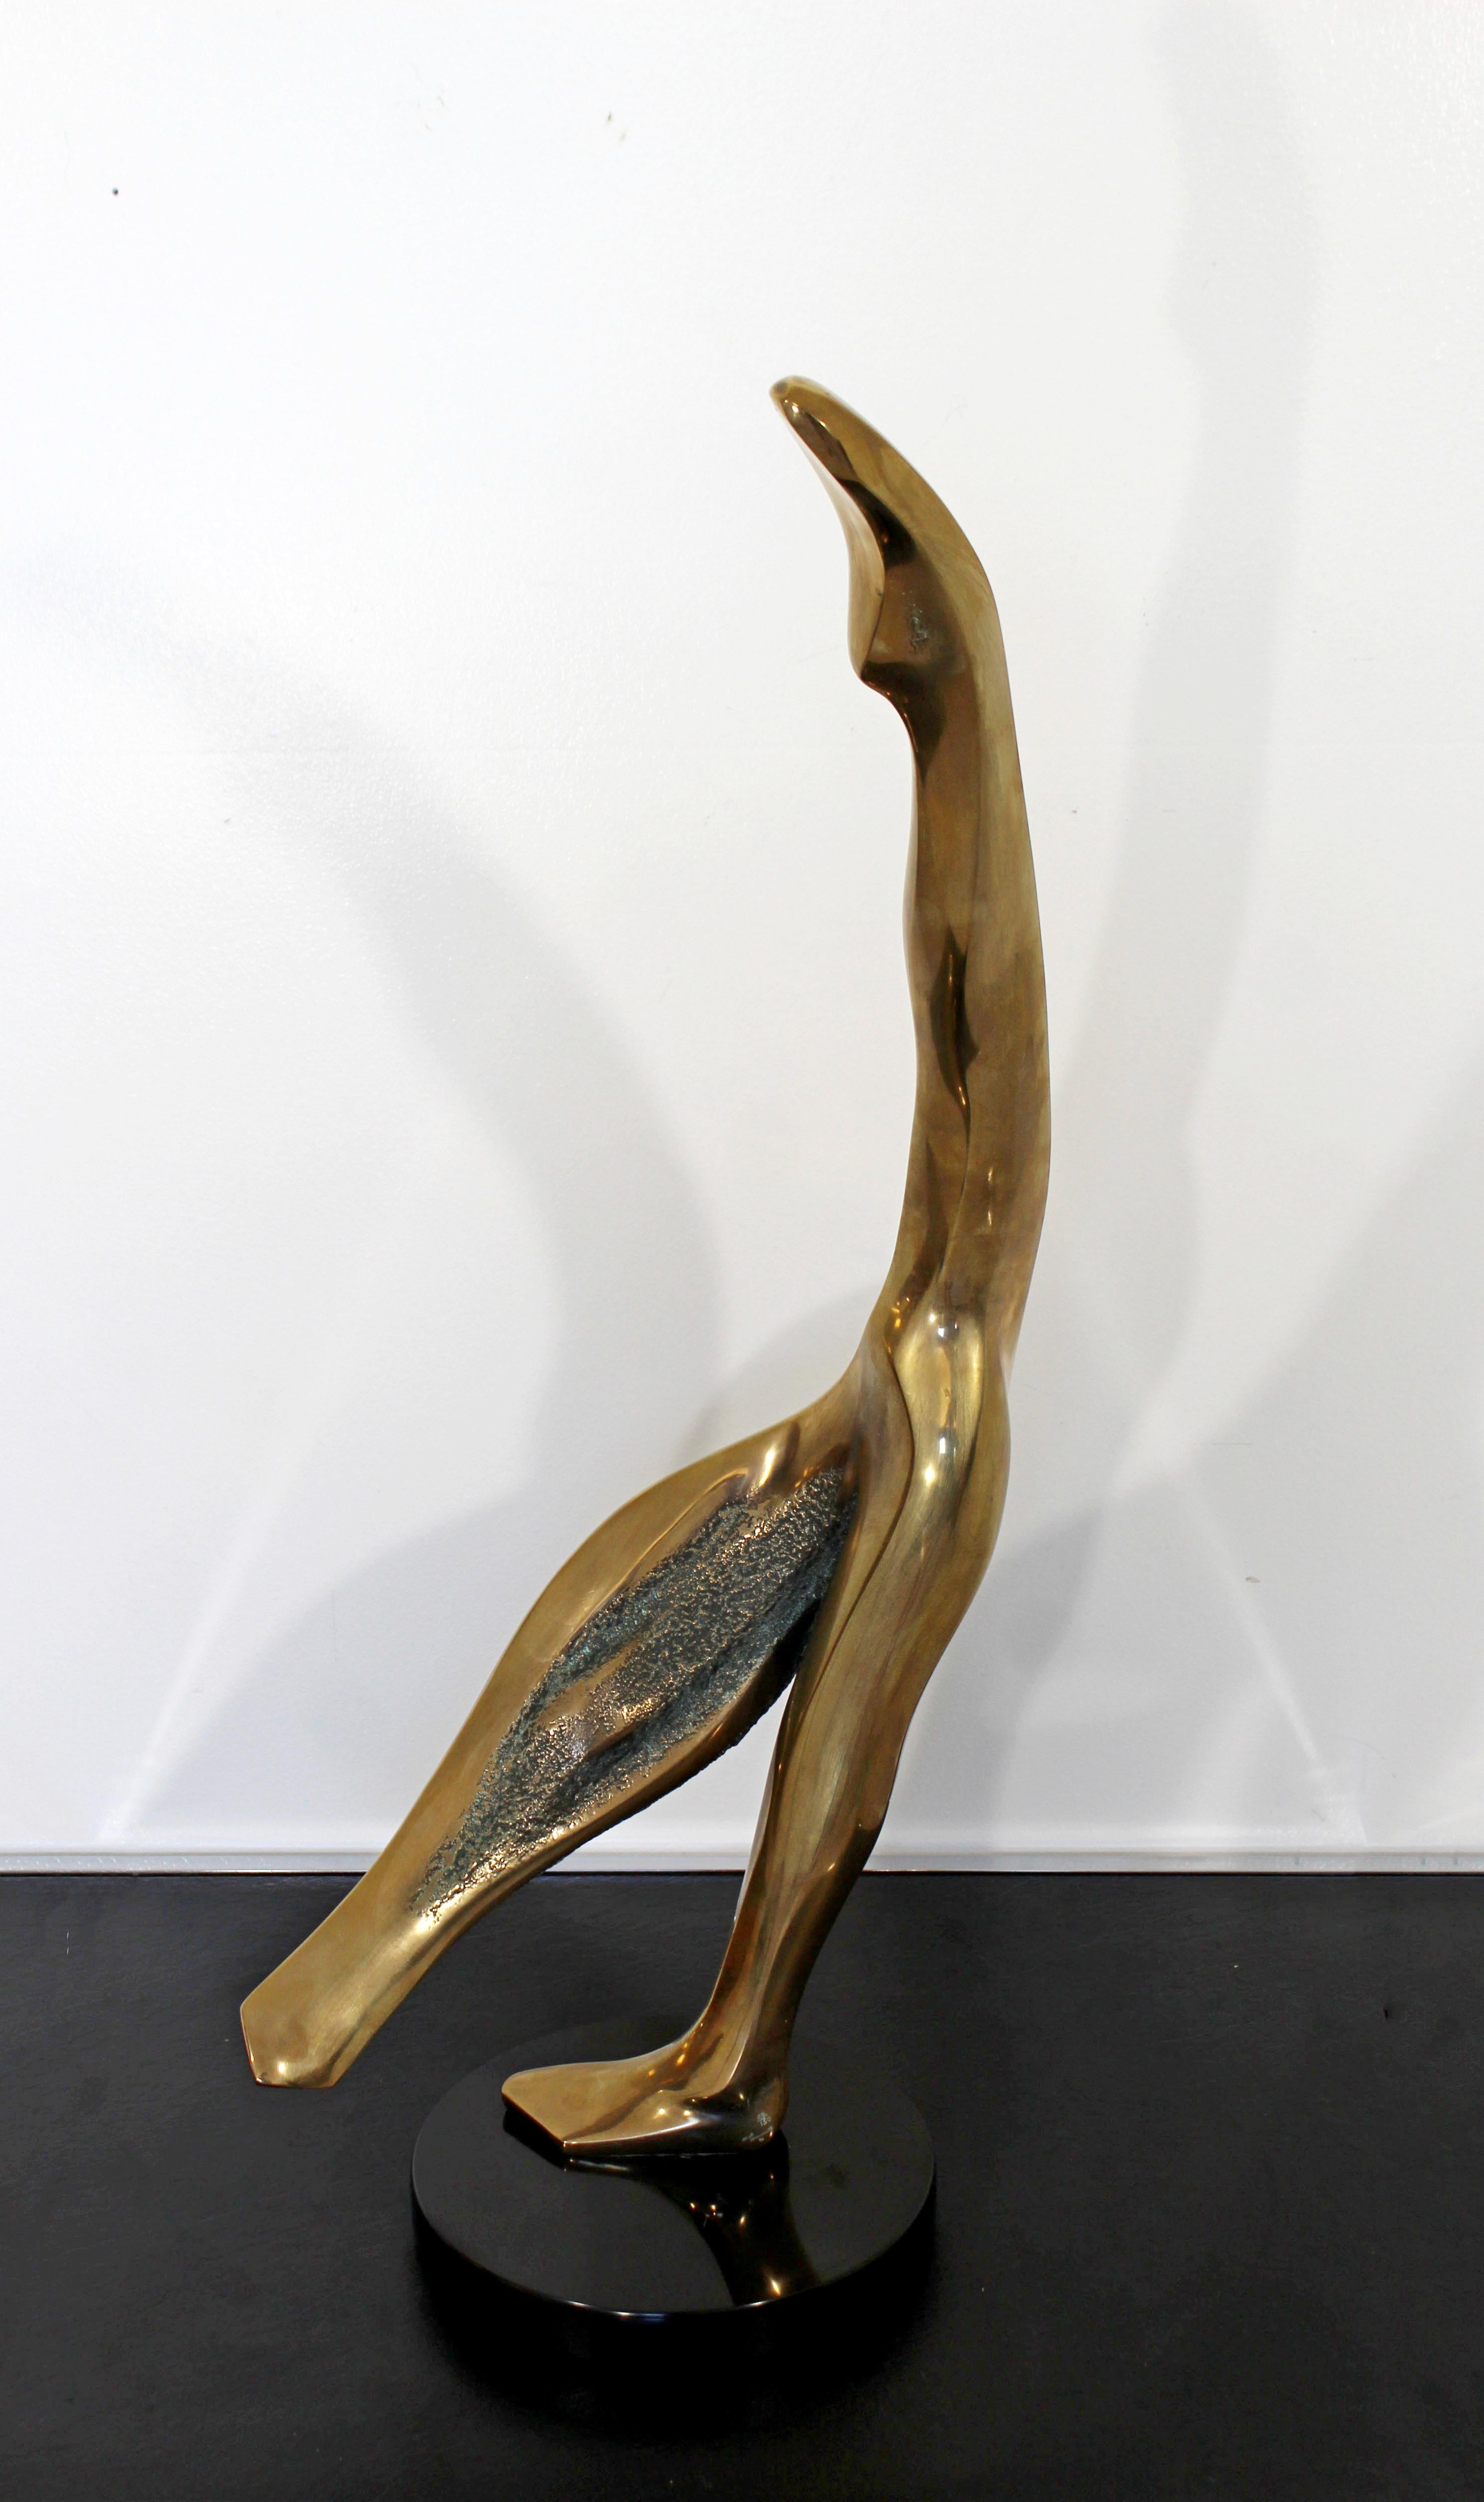 For your consideration is a magnificent, abstracted, bronze ballerina table sculpture, signed dated and numbered, in two places, by Bob Bennett, 25/150, circa 1981. In excellent condition. The dimensions are 12